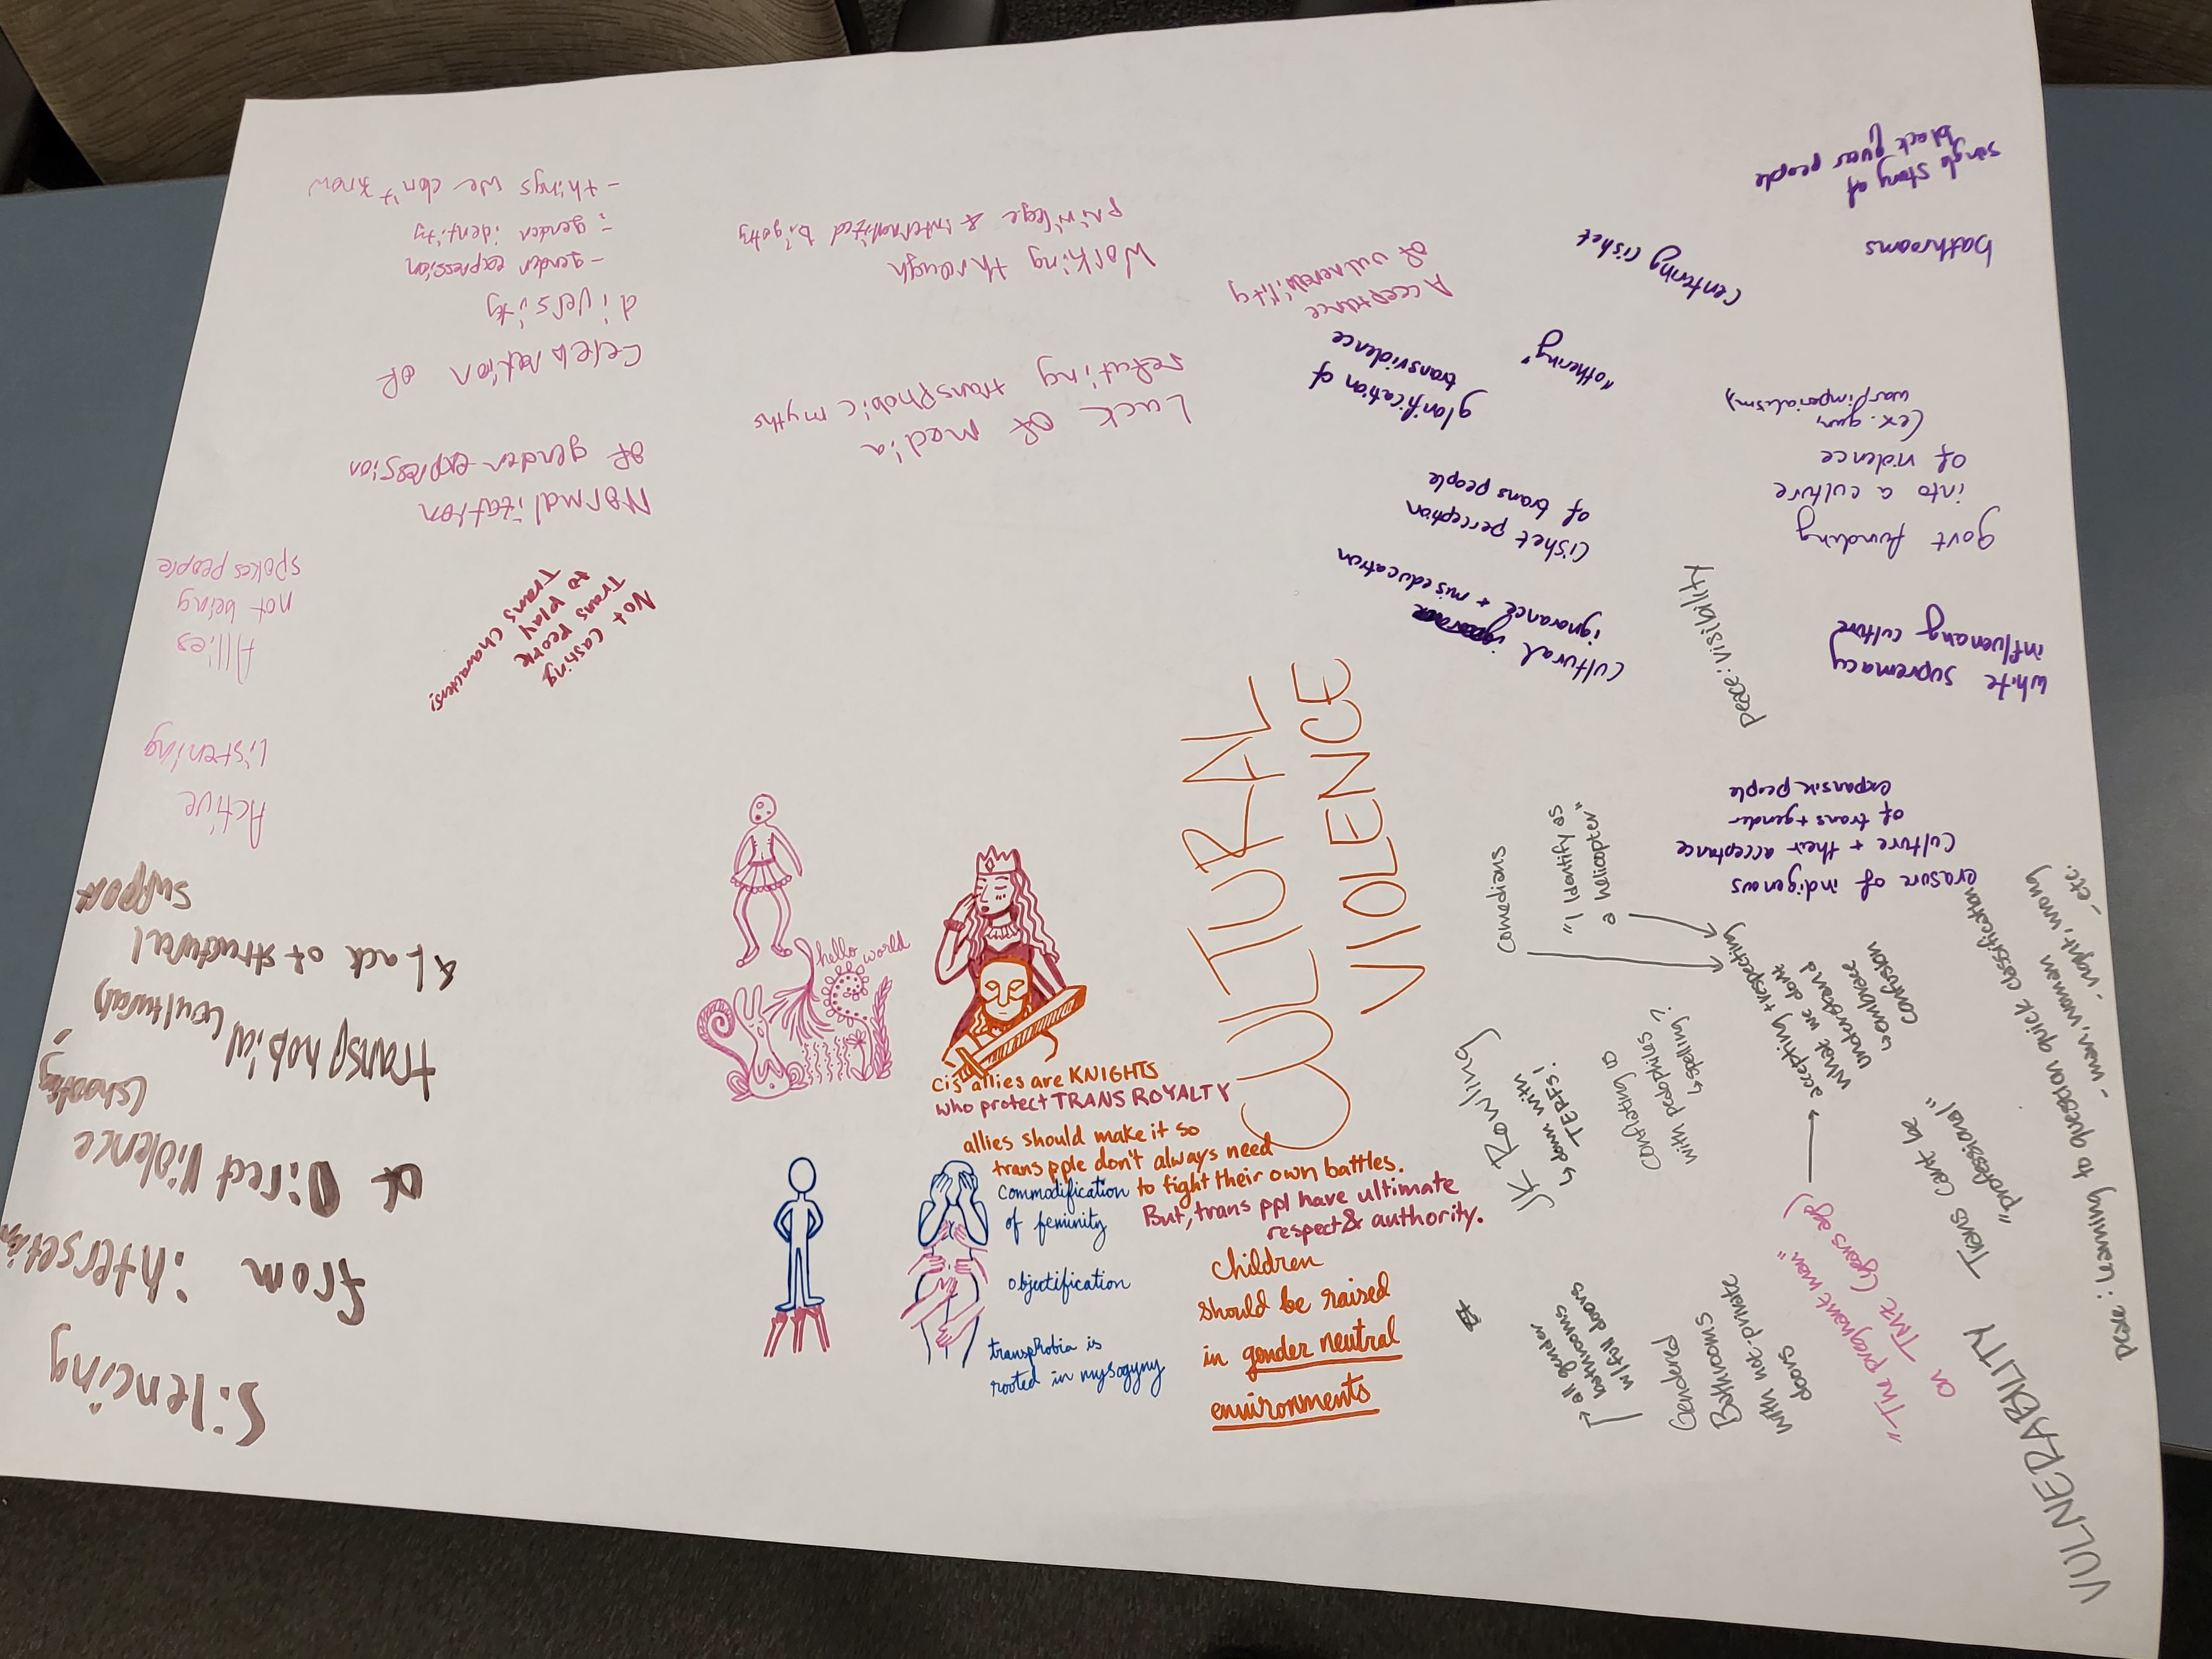 Photo of the poster from Group #3 recording their thoughts and discussion on how cultural violence impacts trans people. Organized description in the caption of the next image.